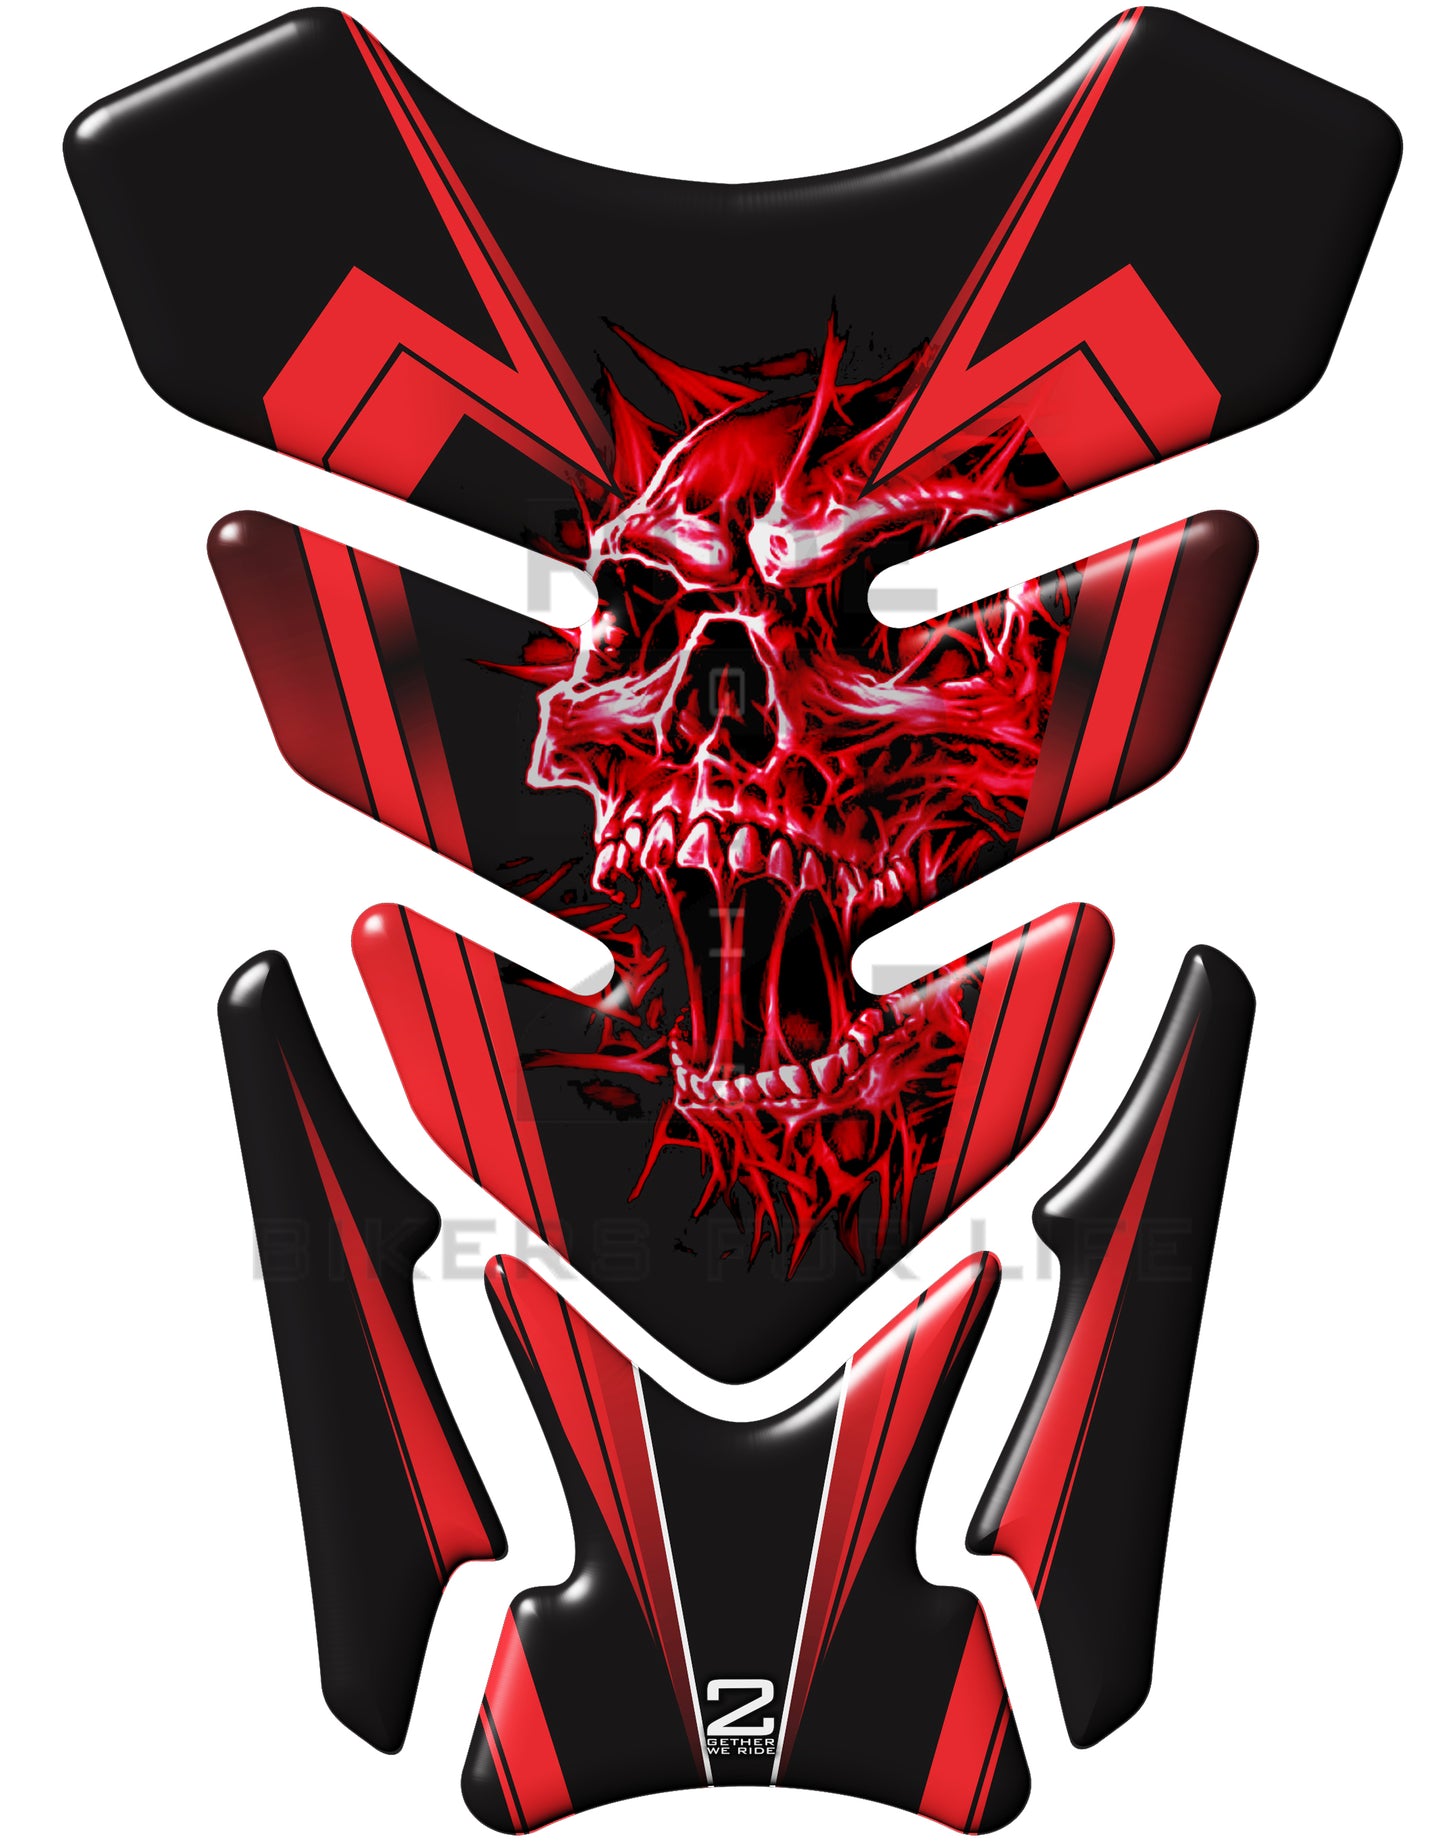 Universal Fit Red Screaming Skull Motor Bike Tank Pad Protector. A Street Pad which fits most motorcycles.